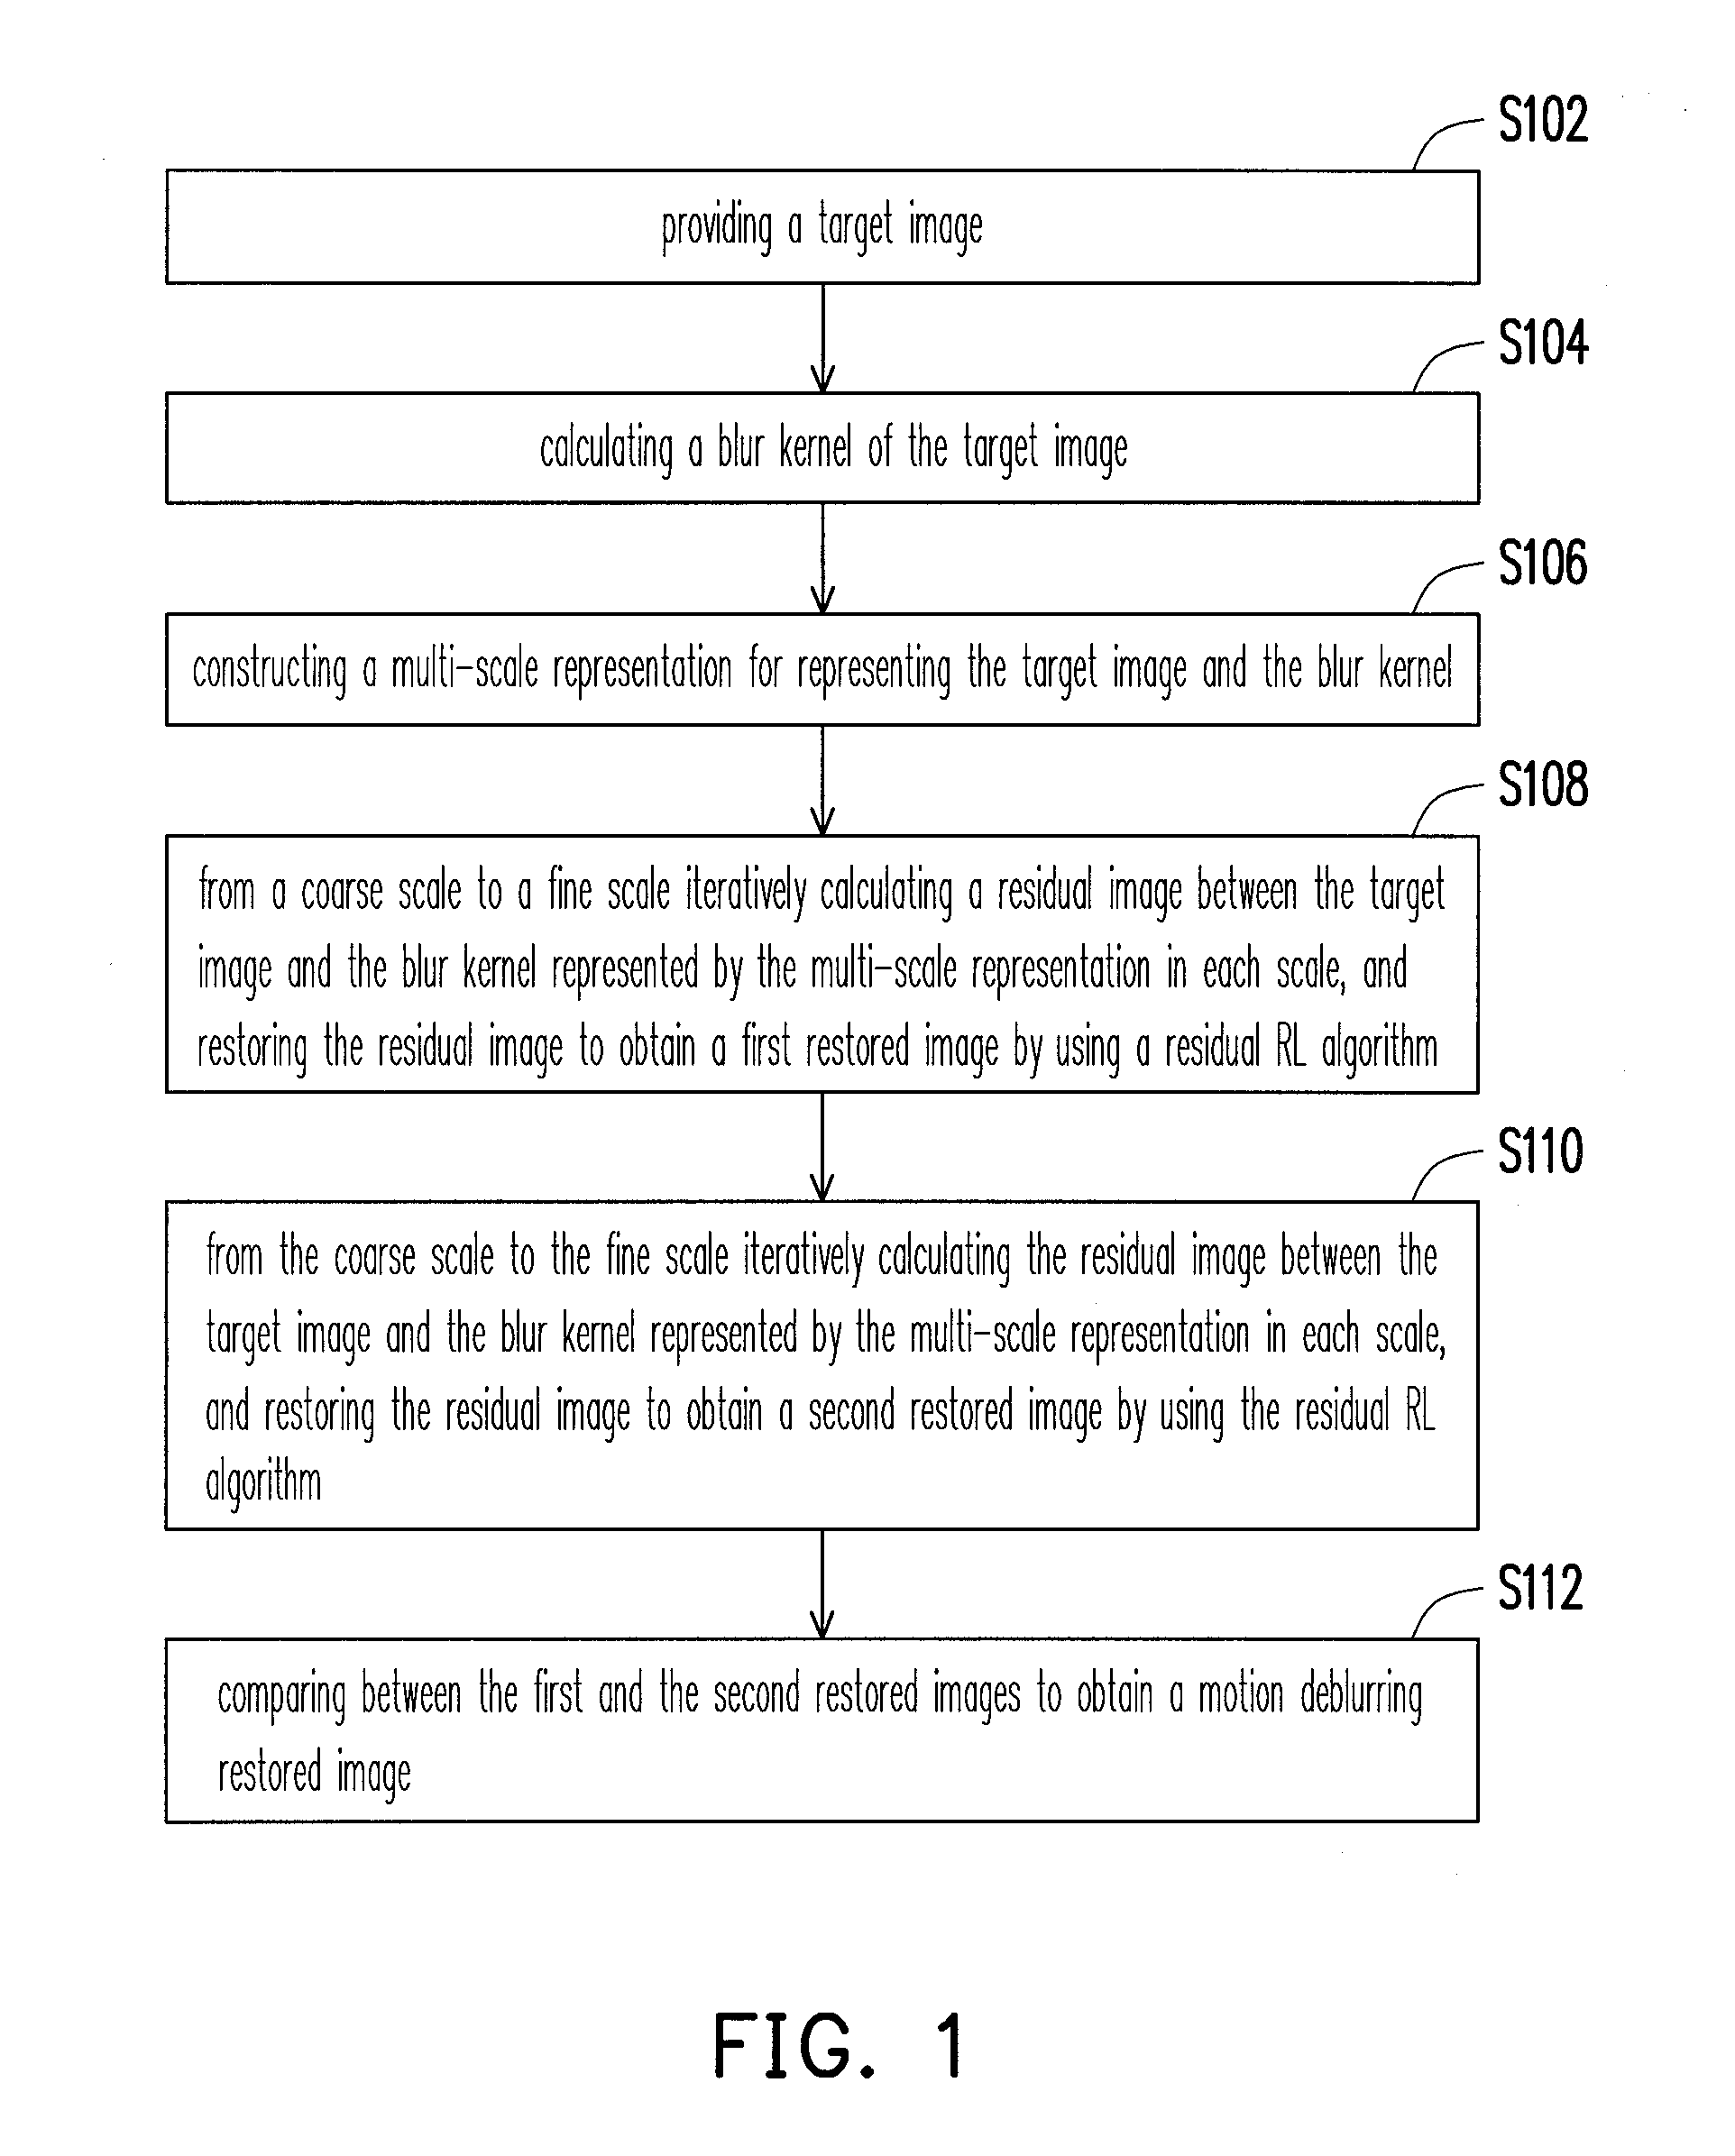 Hierarchical motion deblurring method for single image